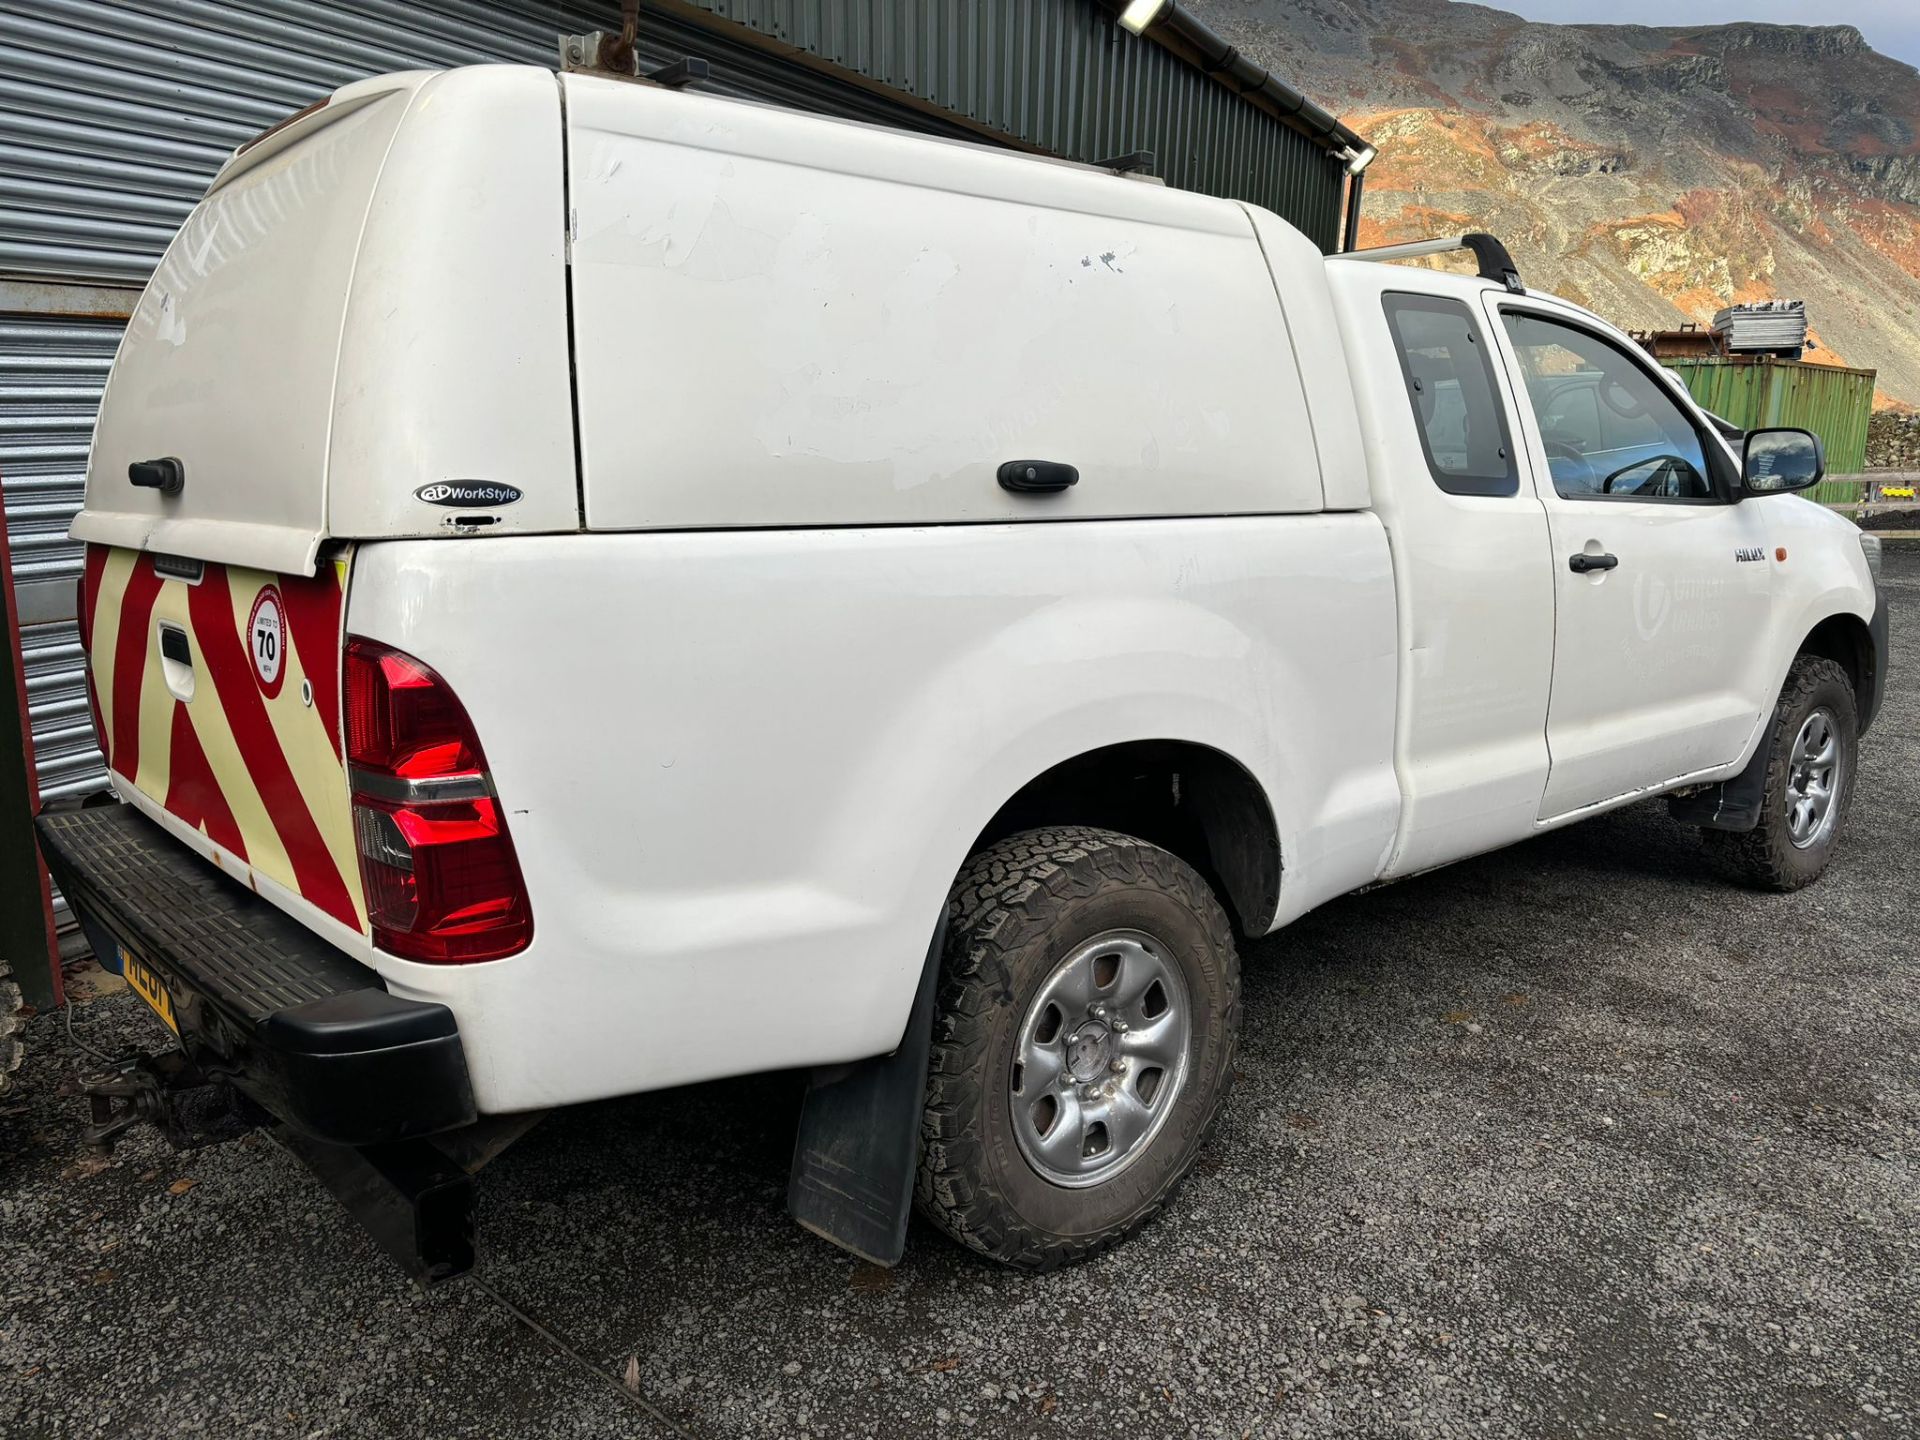 2012 TOYOTA HILUX KING CAB PICKUP TRUCK 4X4 - Image 4 of 8